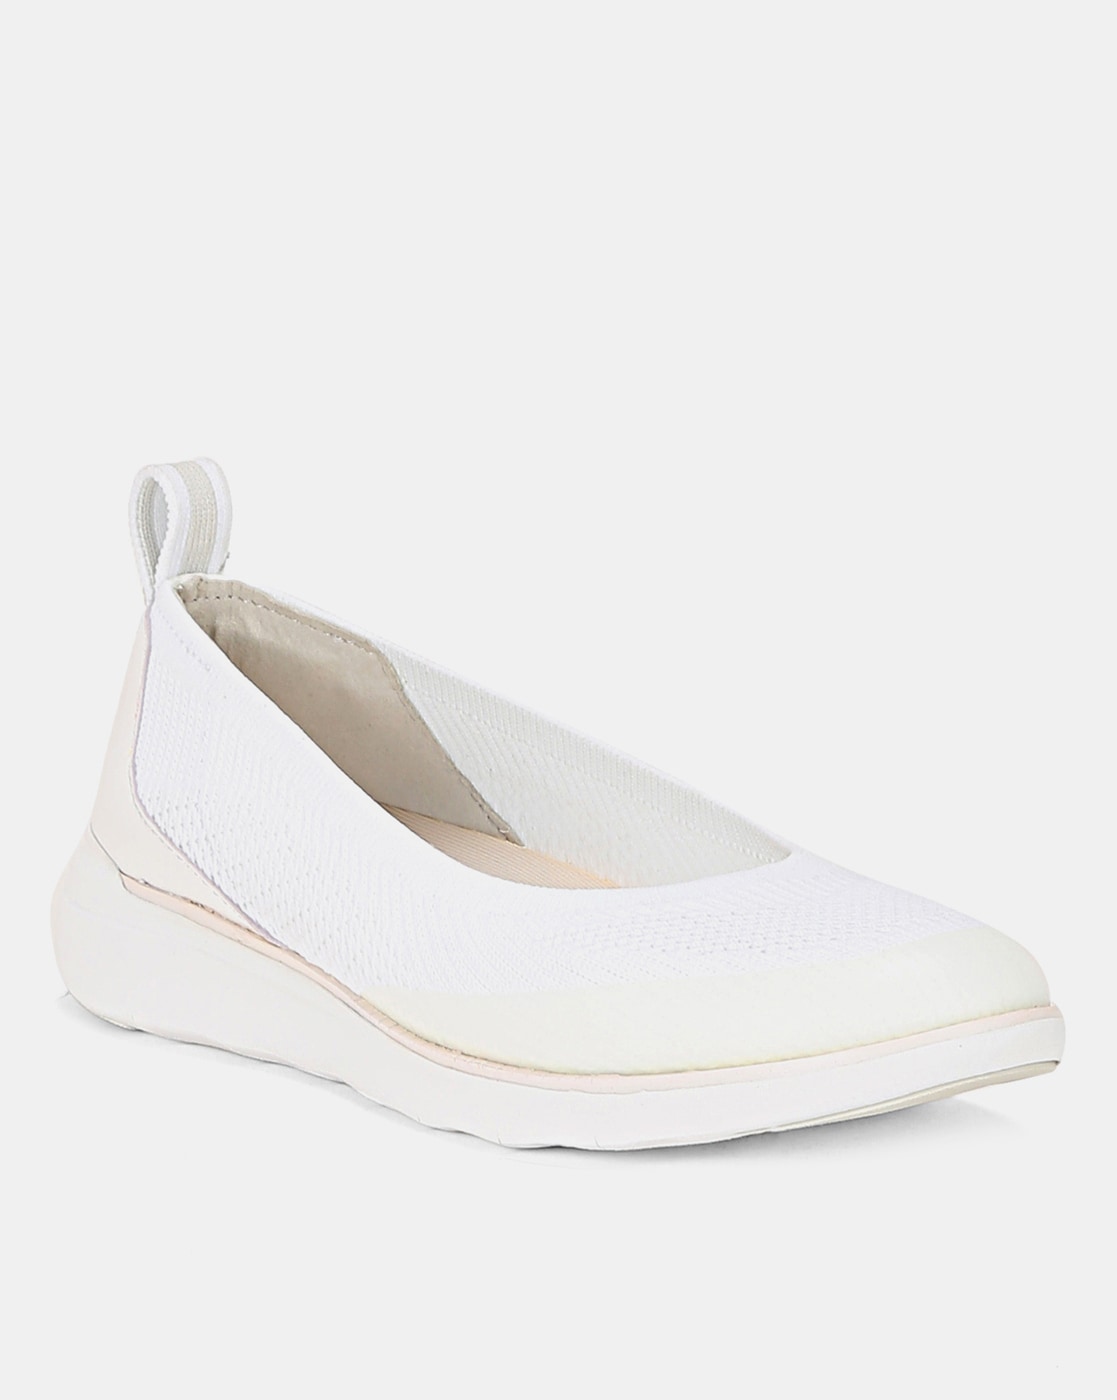 off white flat shoes